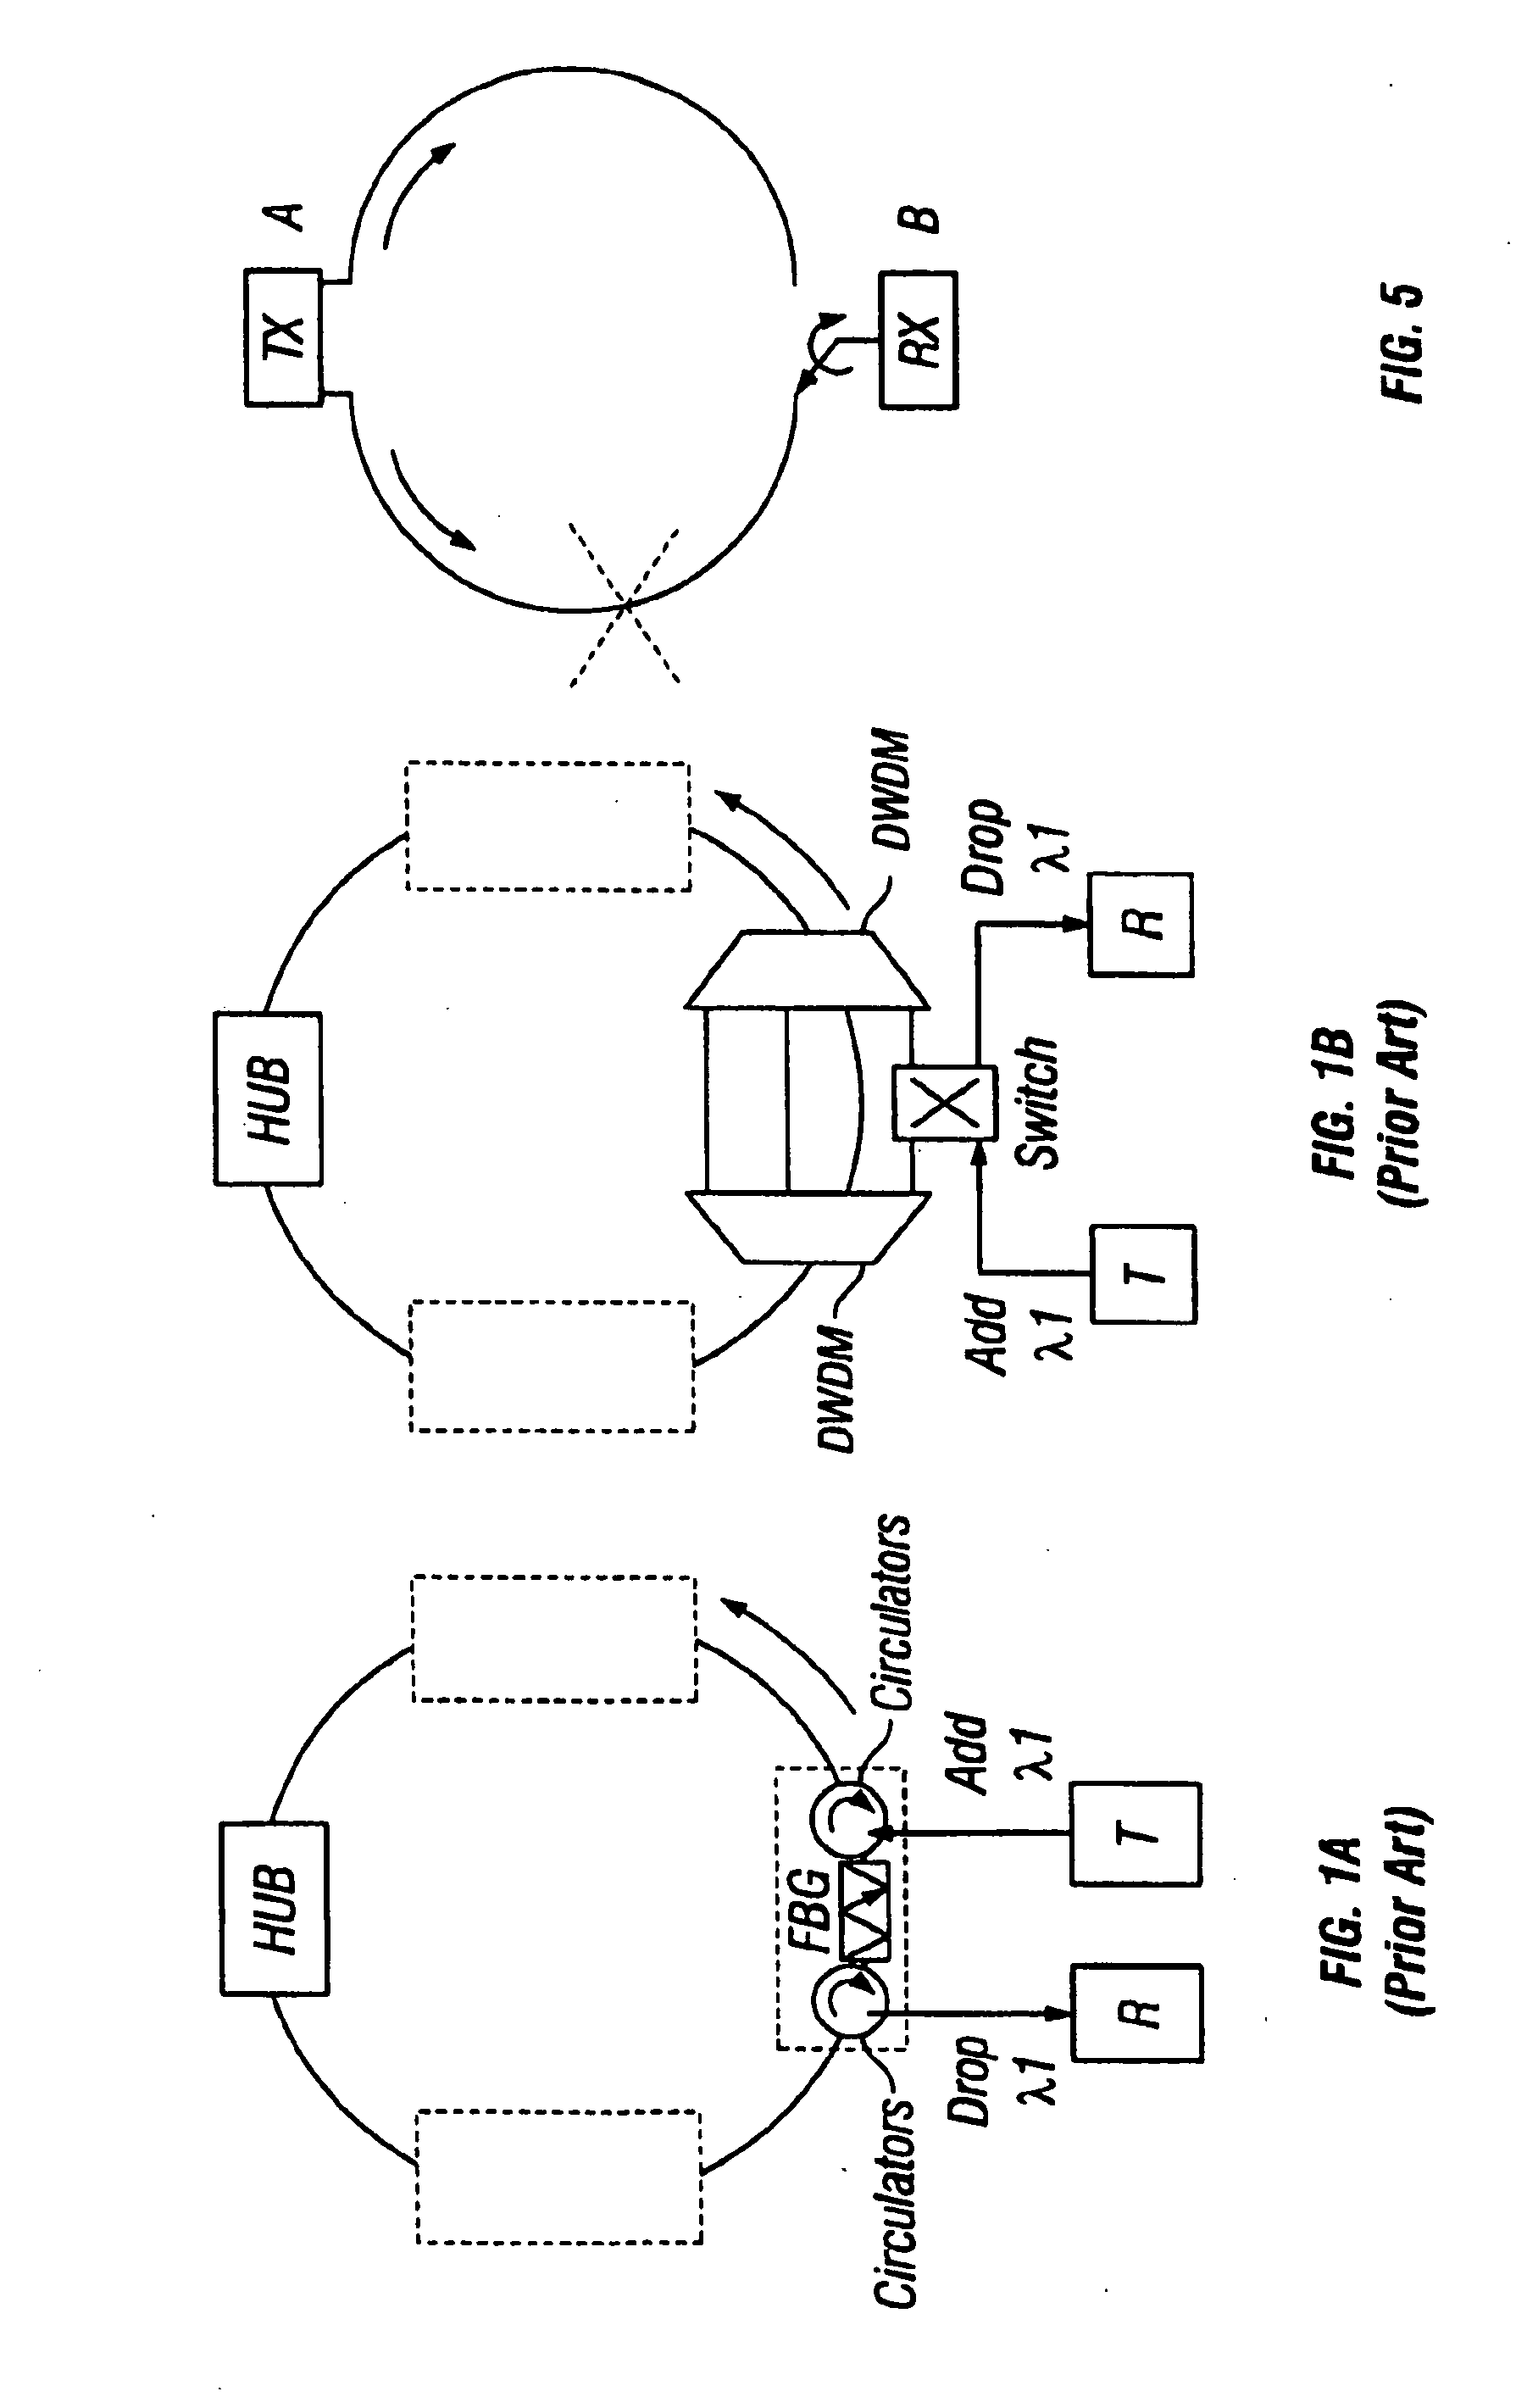 Optical double sideband modulation technique with increased spectral efficiency